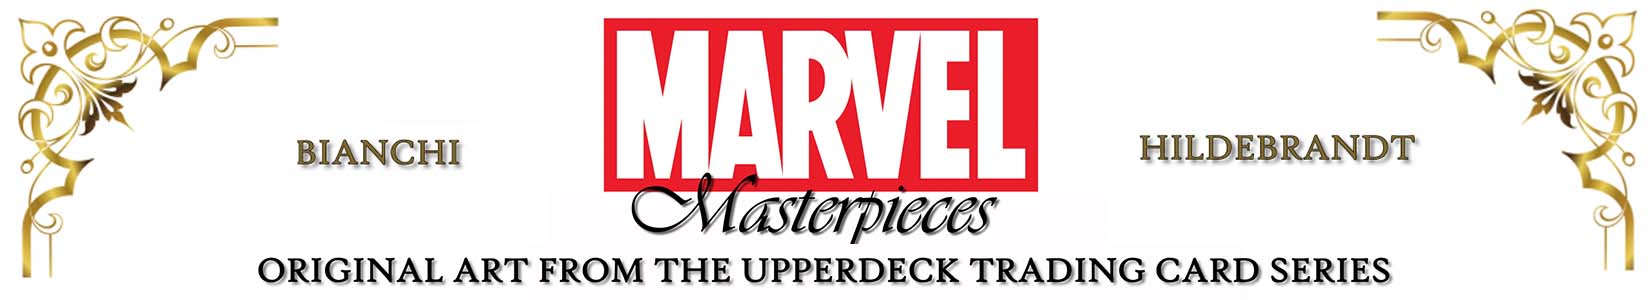 THE MARVEL MASTERPIECES GALLERY COLLECTION